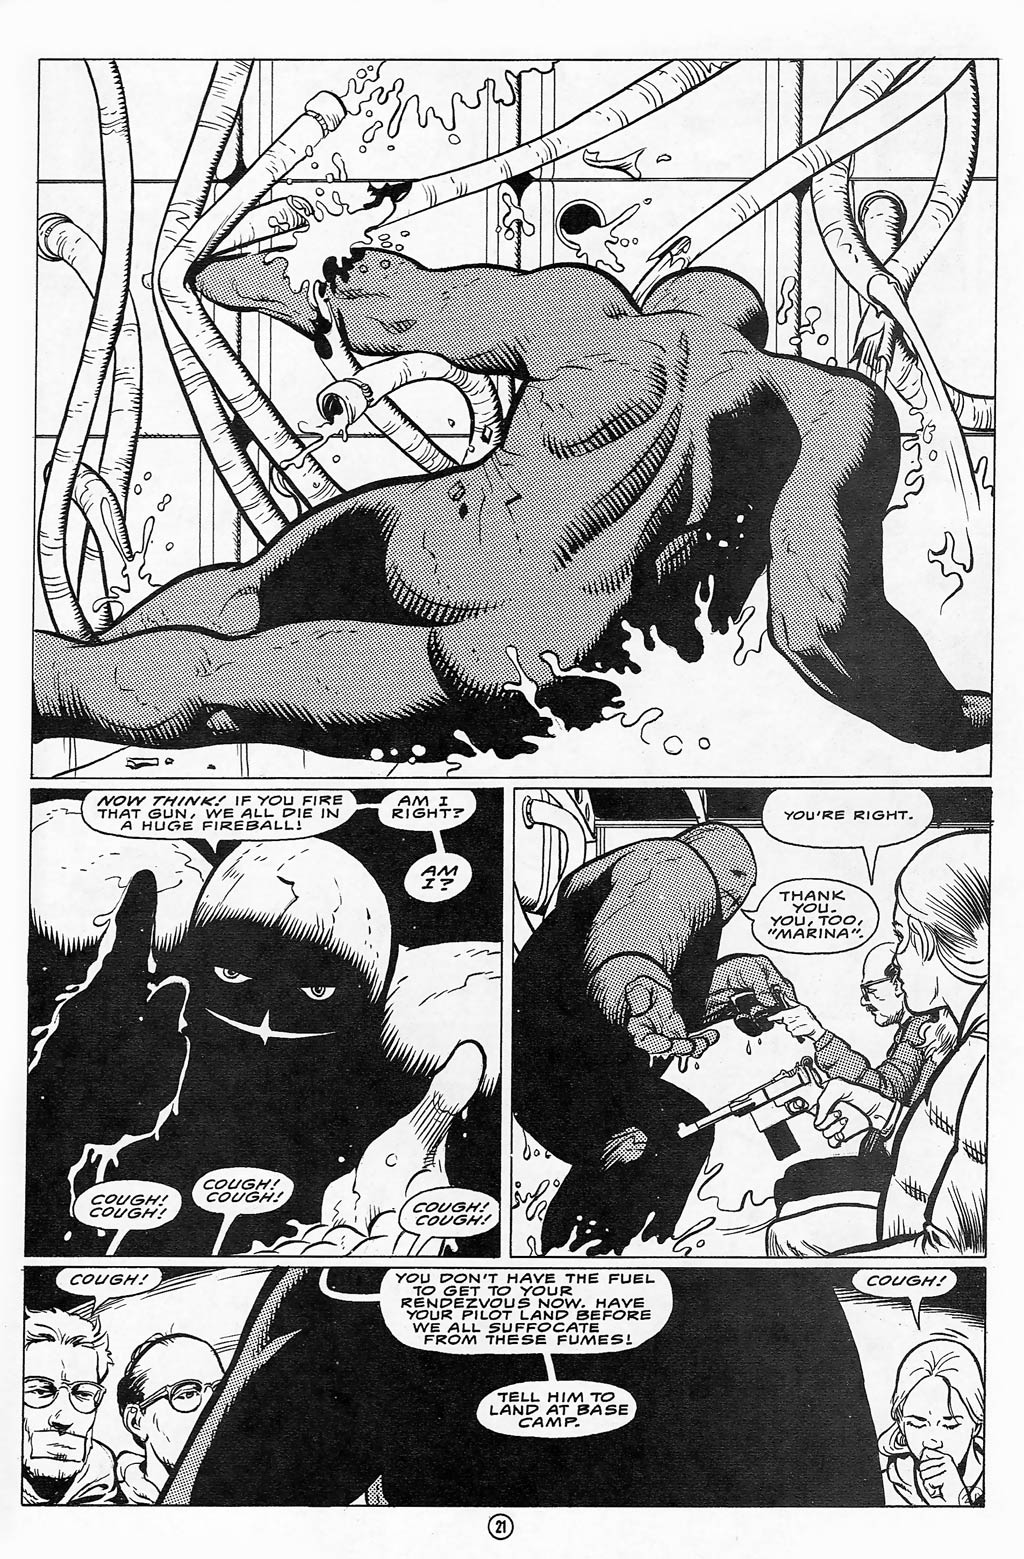 Concrete (1987) issue 9 - Page 21